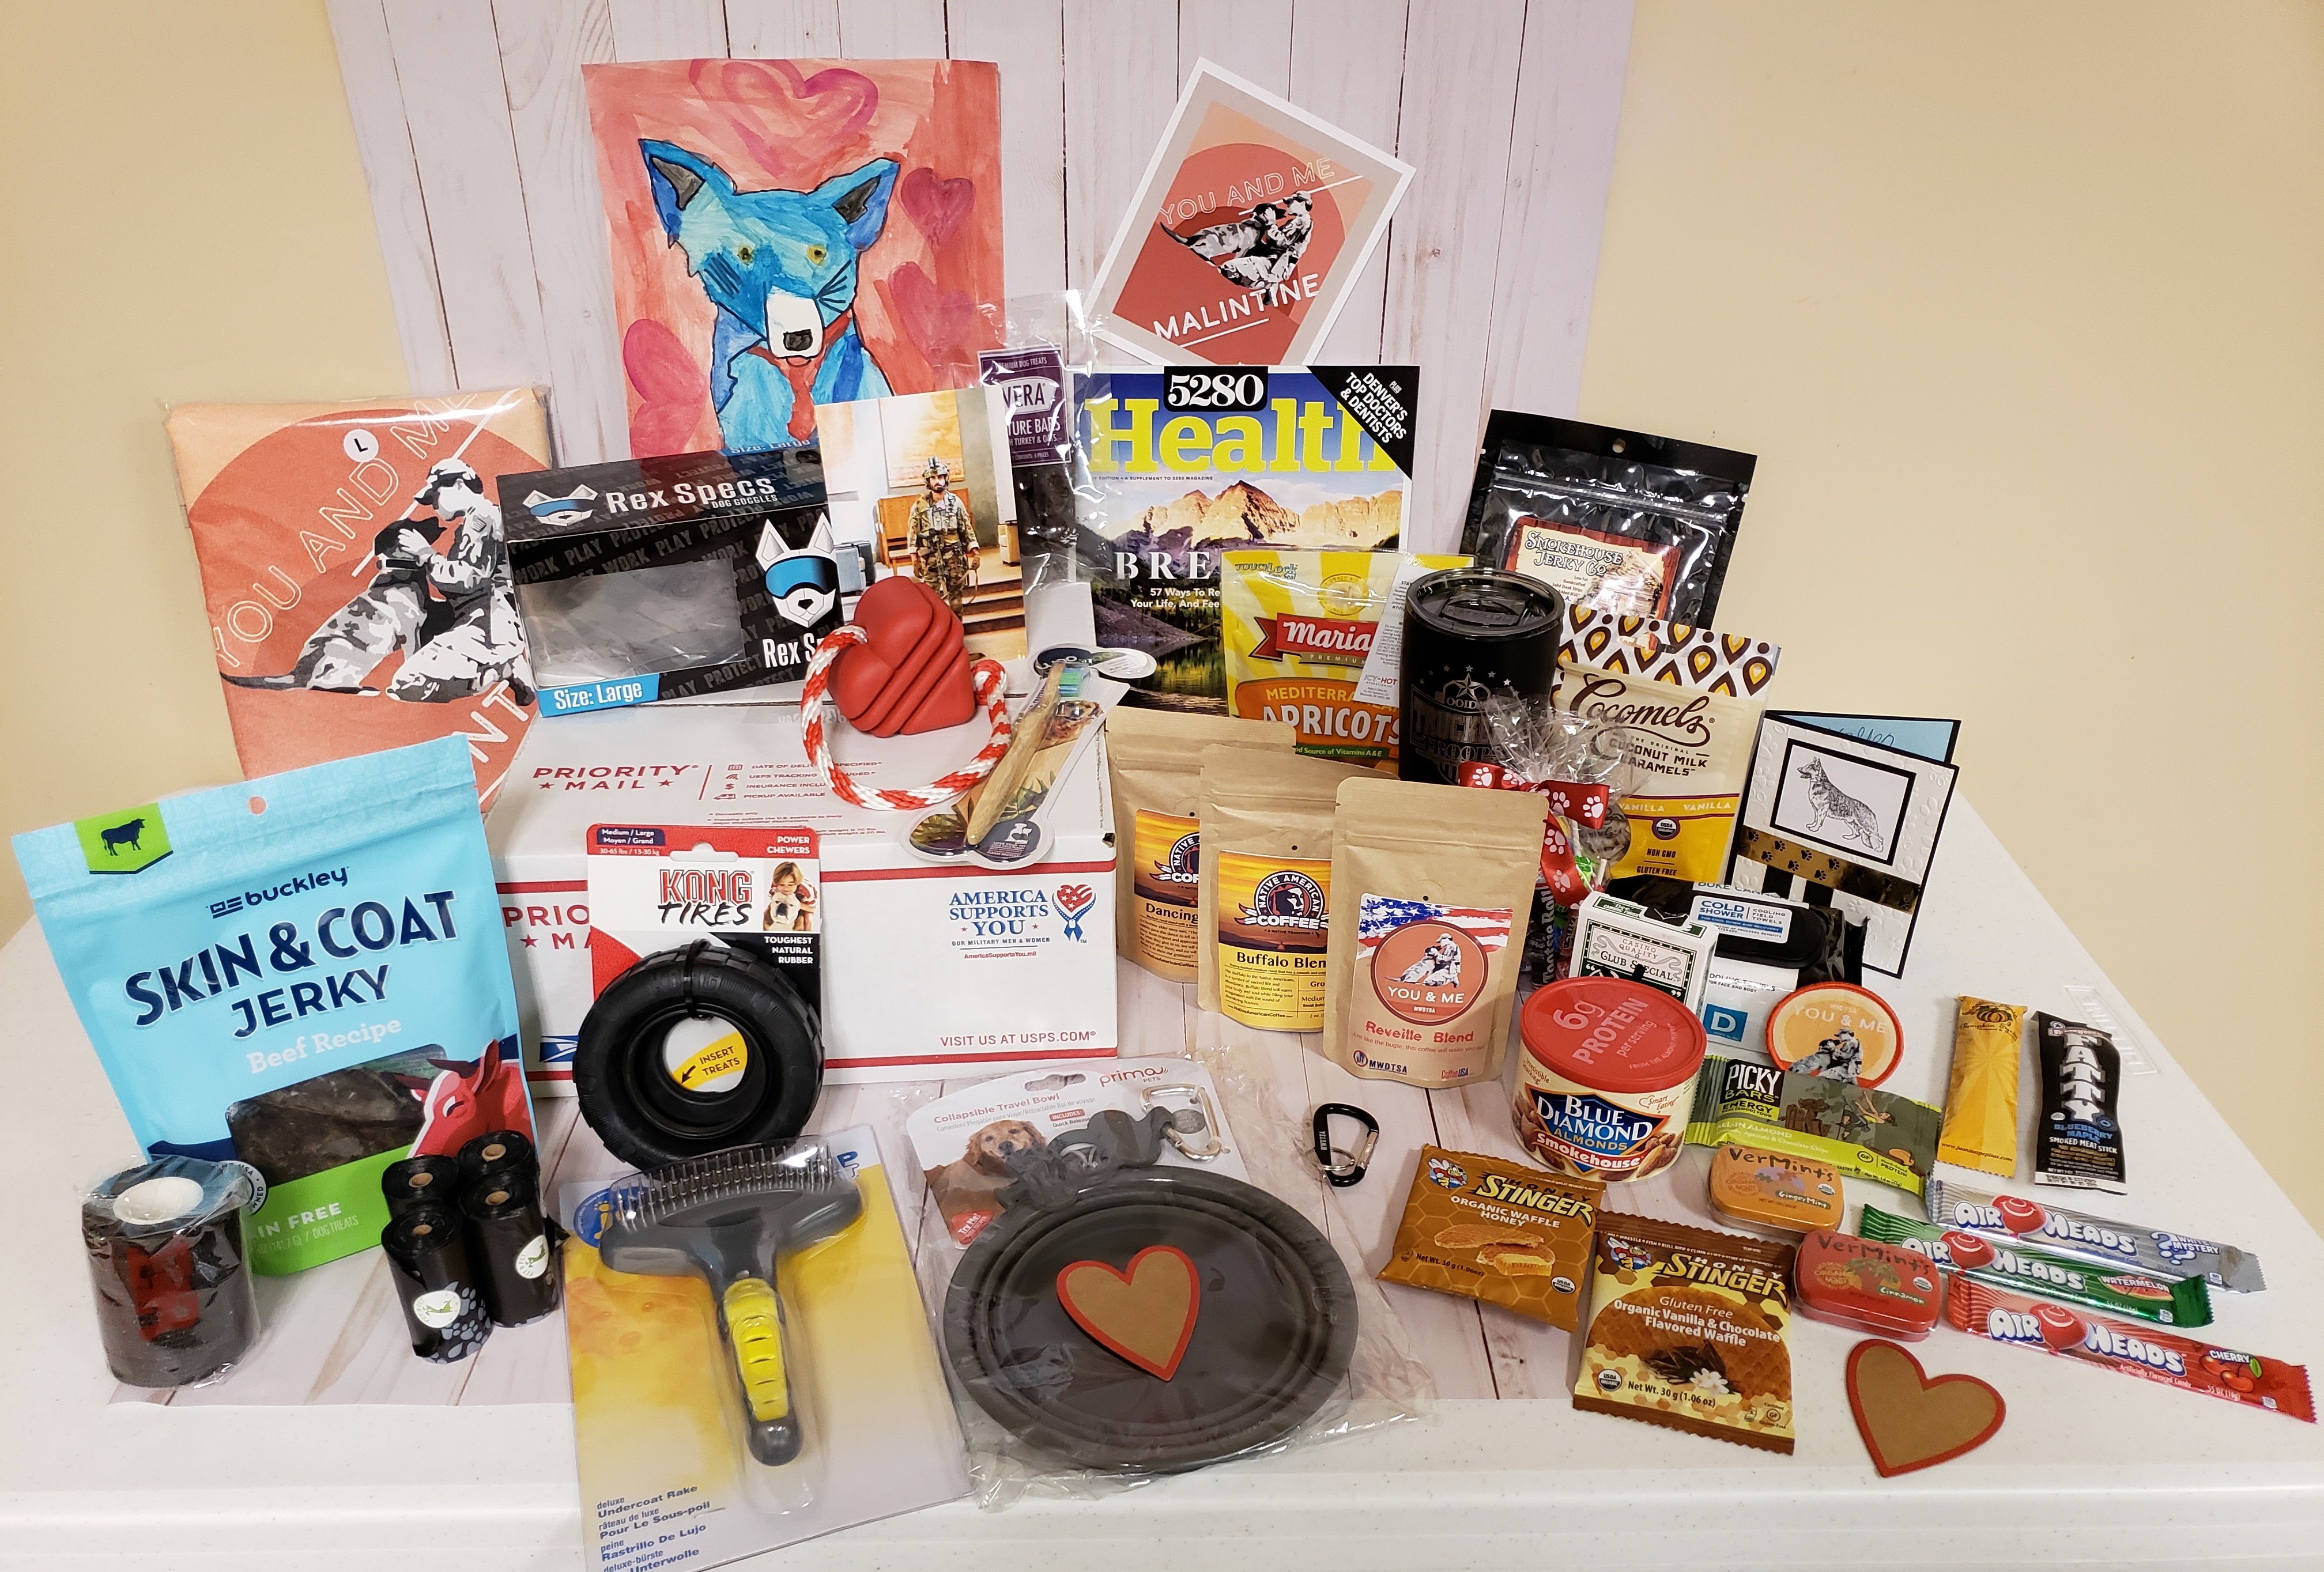 This photo shows care packages items sent in Q1-2019 to support military working dog teams.